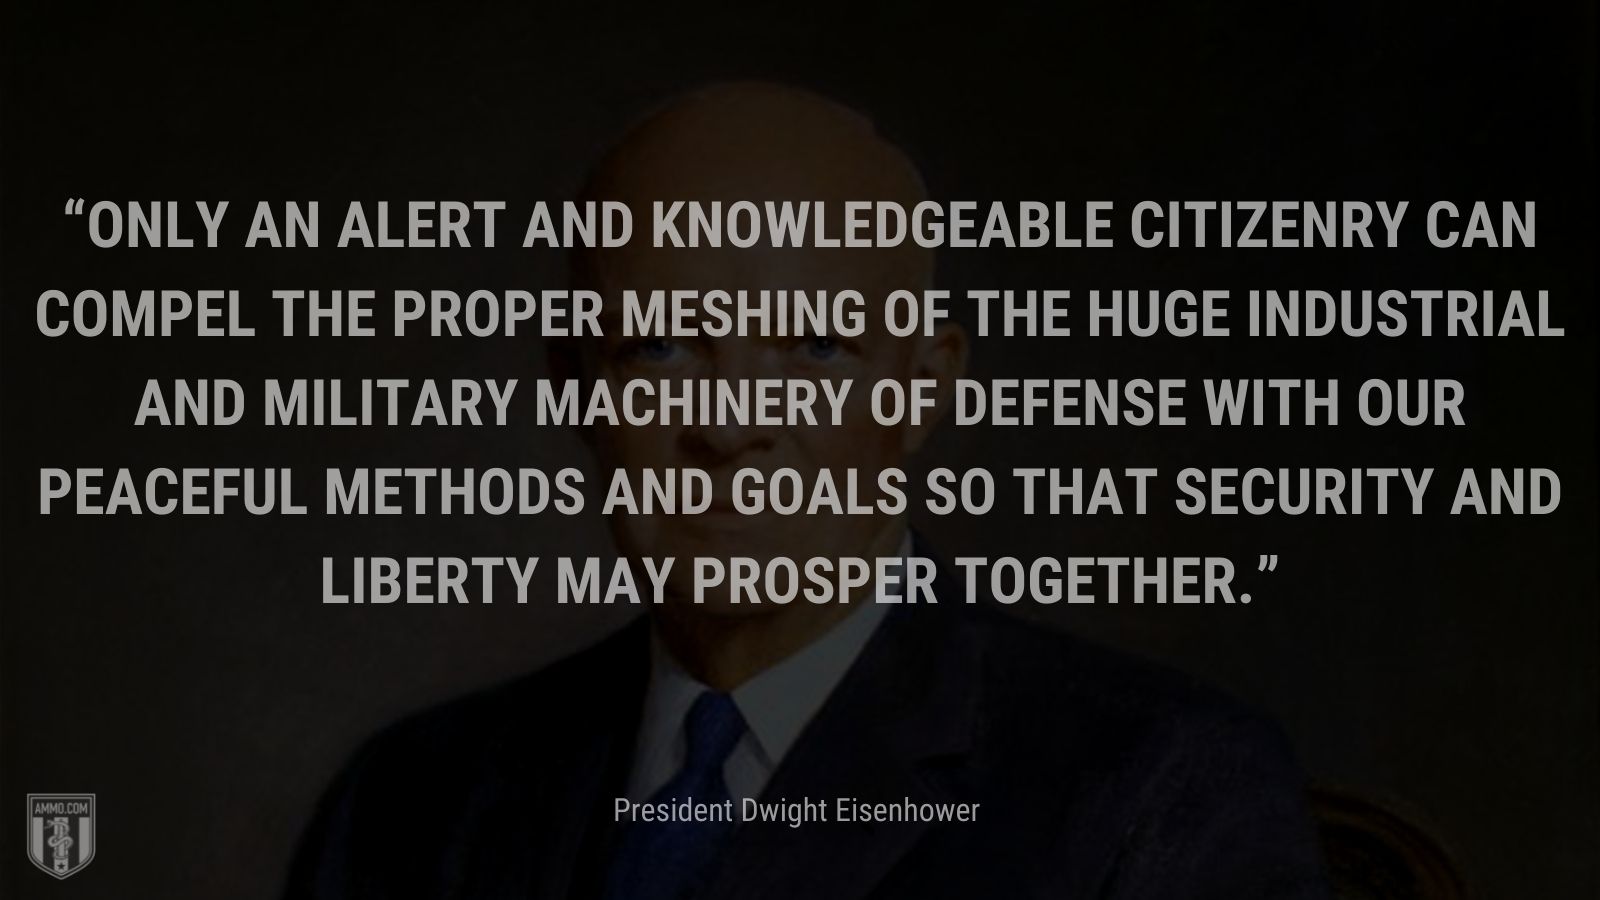 “Only an alert and knowledgeable citizenry can compel the proper meshing of the huge industrial and military machinery of defense with our peaceful methods and goals so that security and liberty may prosper together.” - President Dwight Eisenhower